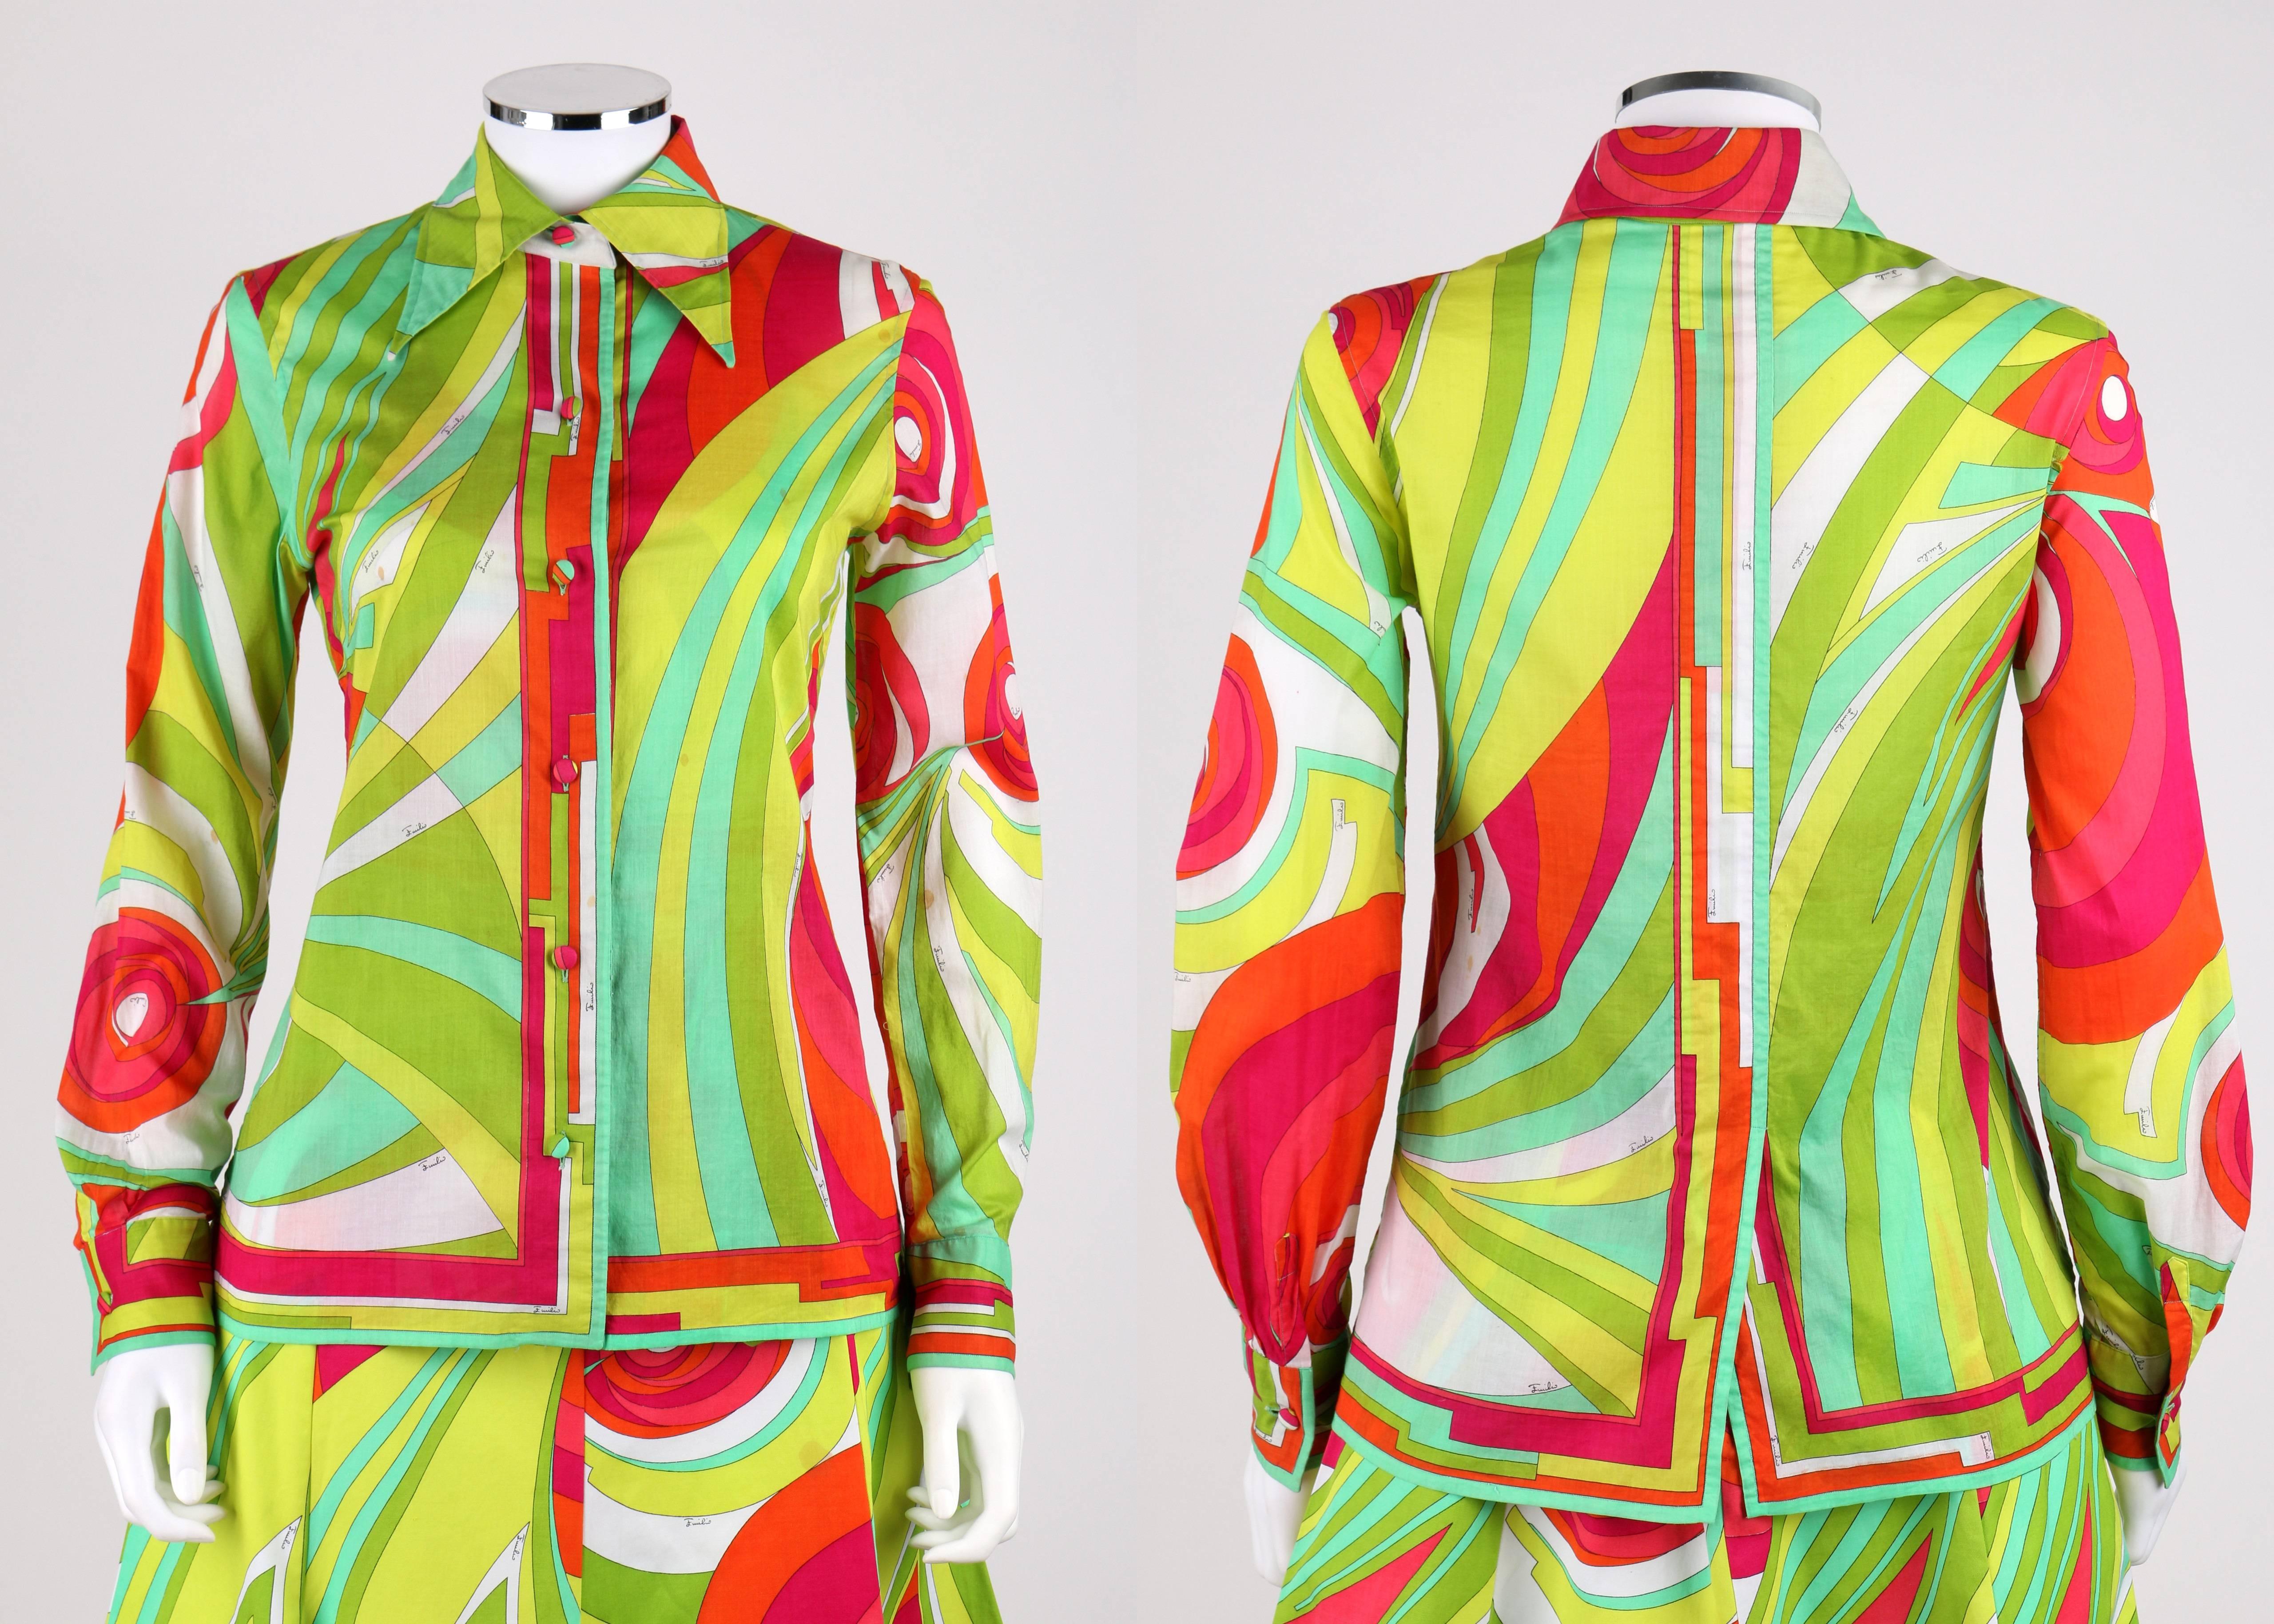 Vintage c.1970s Emilio Pucci green multi-color abstract signature print three piece cotton set. Light weight long sleeve button down shirt with button detailing at cuff. Pointed collar. Center back vent. Cotton jersey halter top buttons at back of